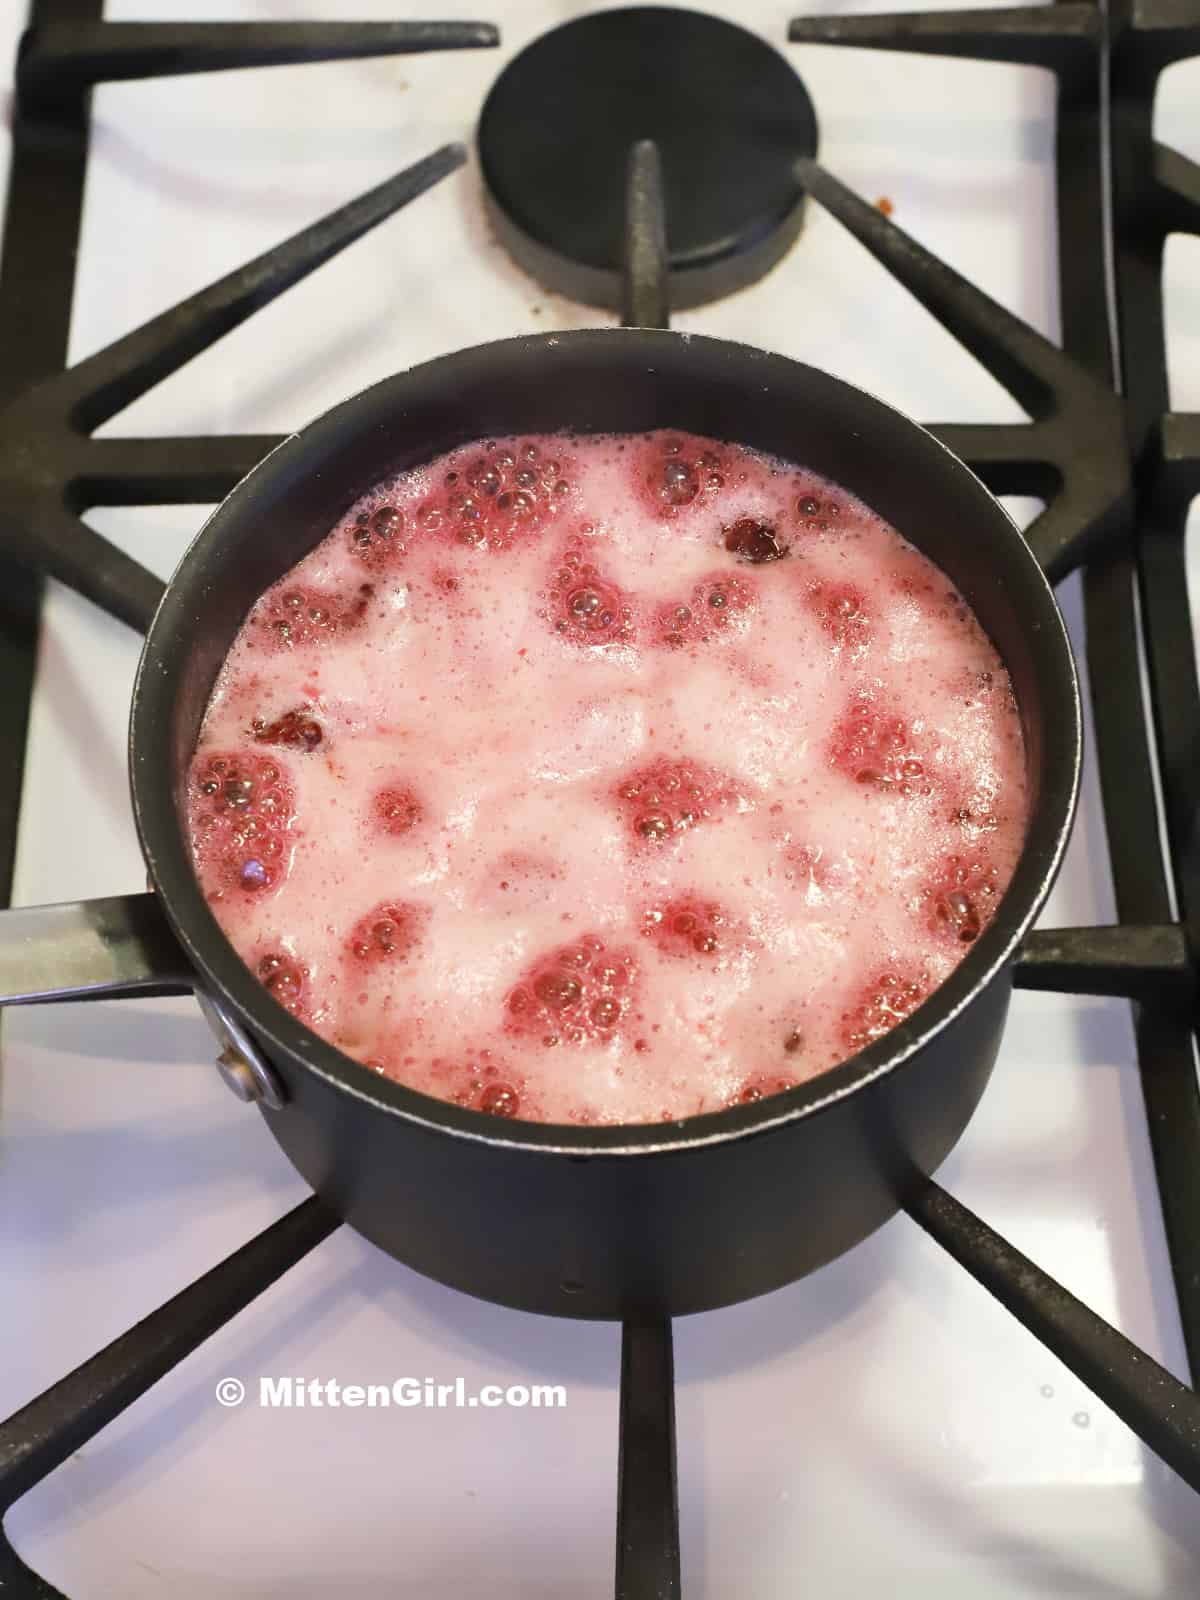 Blackberry syrup foaming up on the stove.